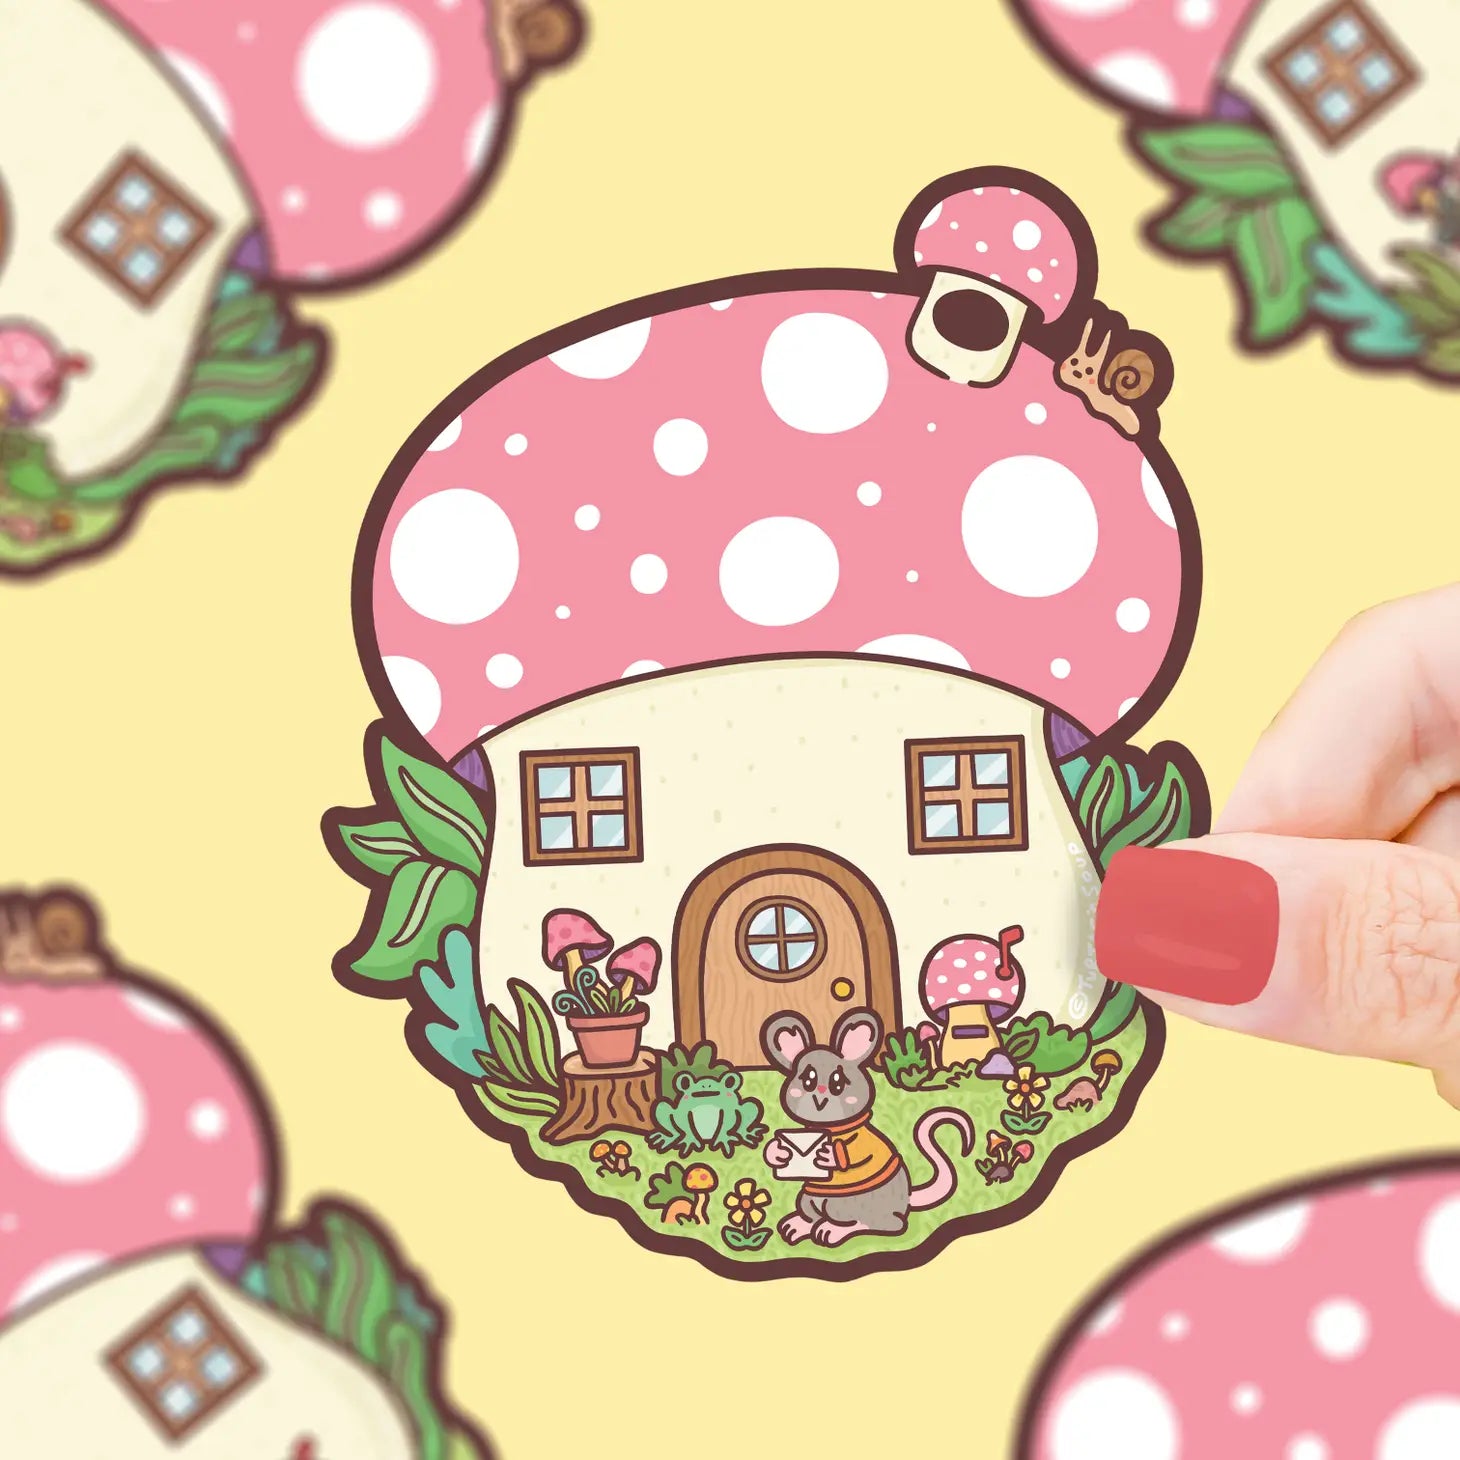 Die-cut sticker of a mushroom cottage with a mouse holding an envelope outside. Colors are pink, white, cream, brown, green, and grey